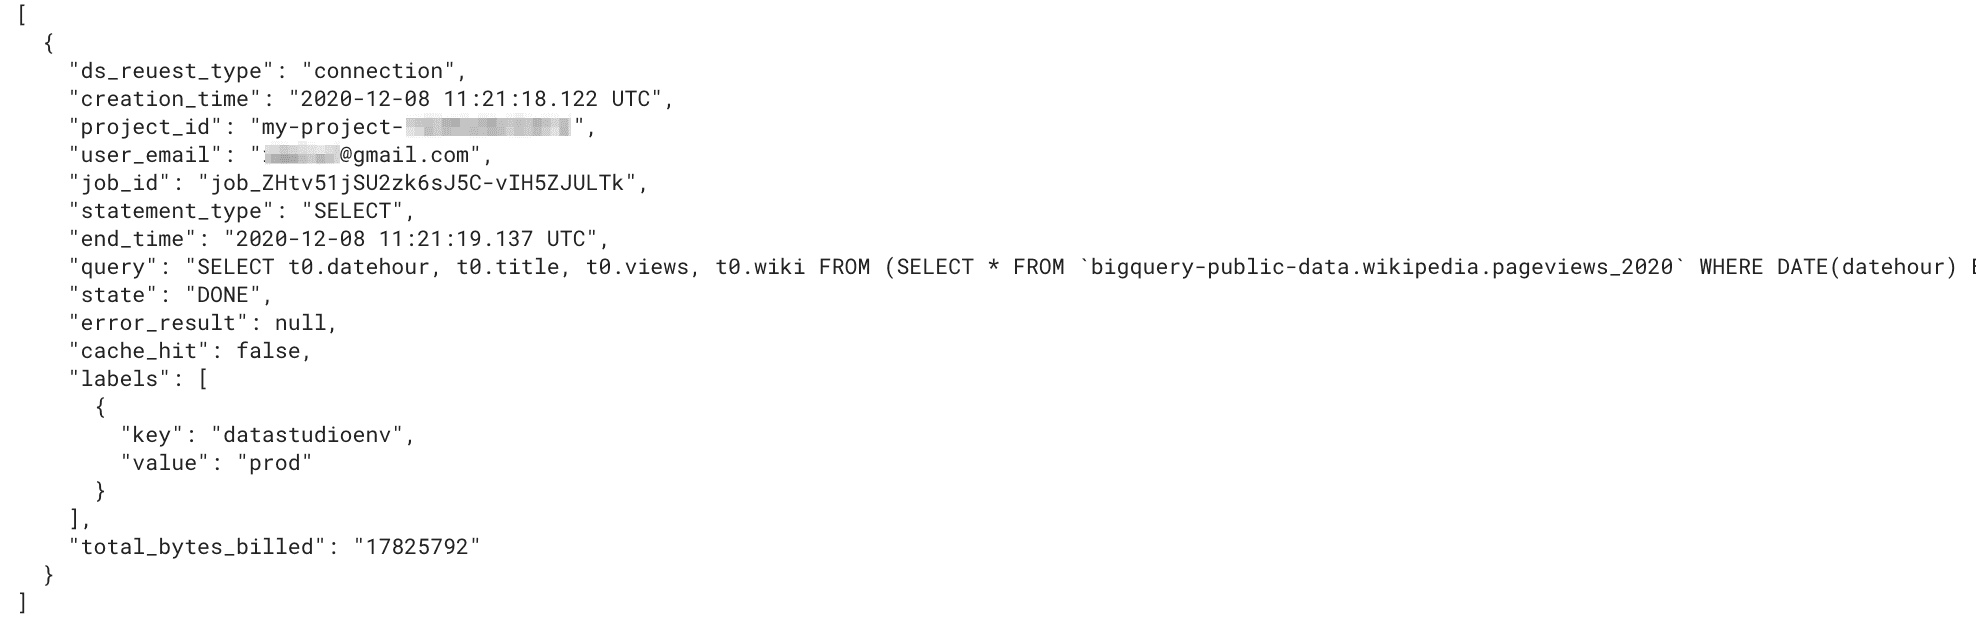 log_job_query_connection